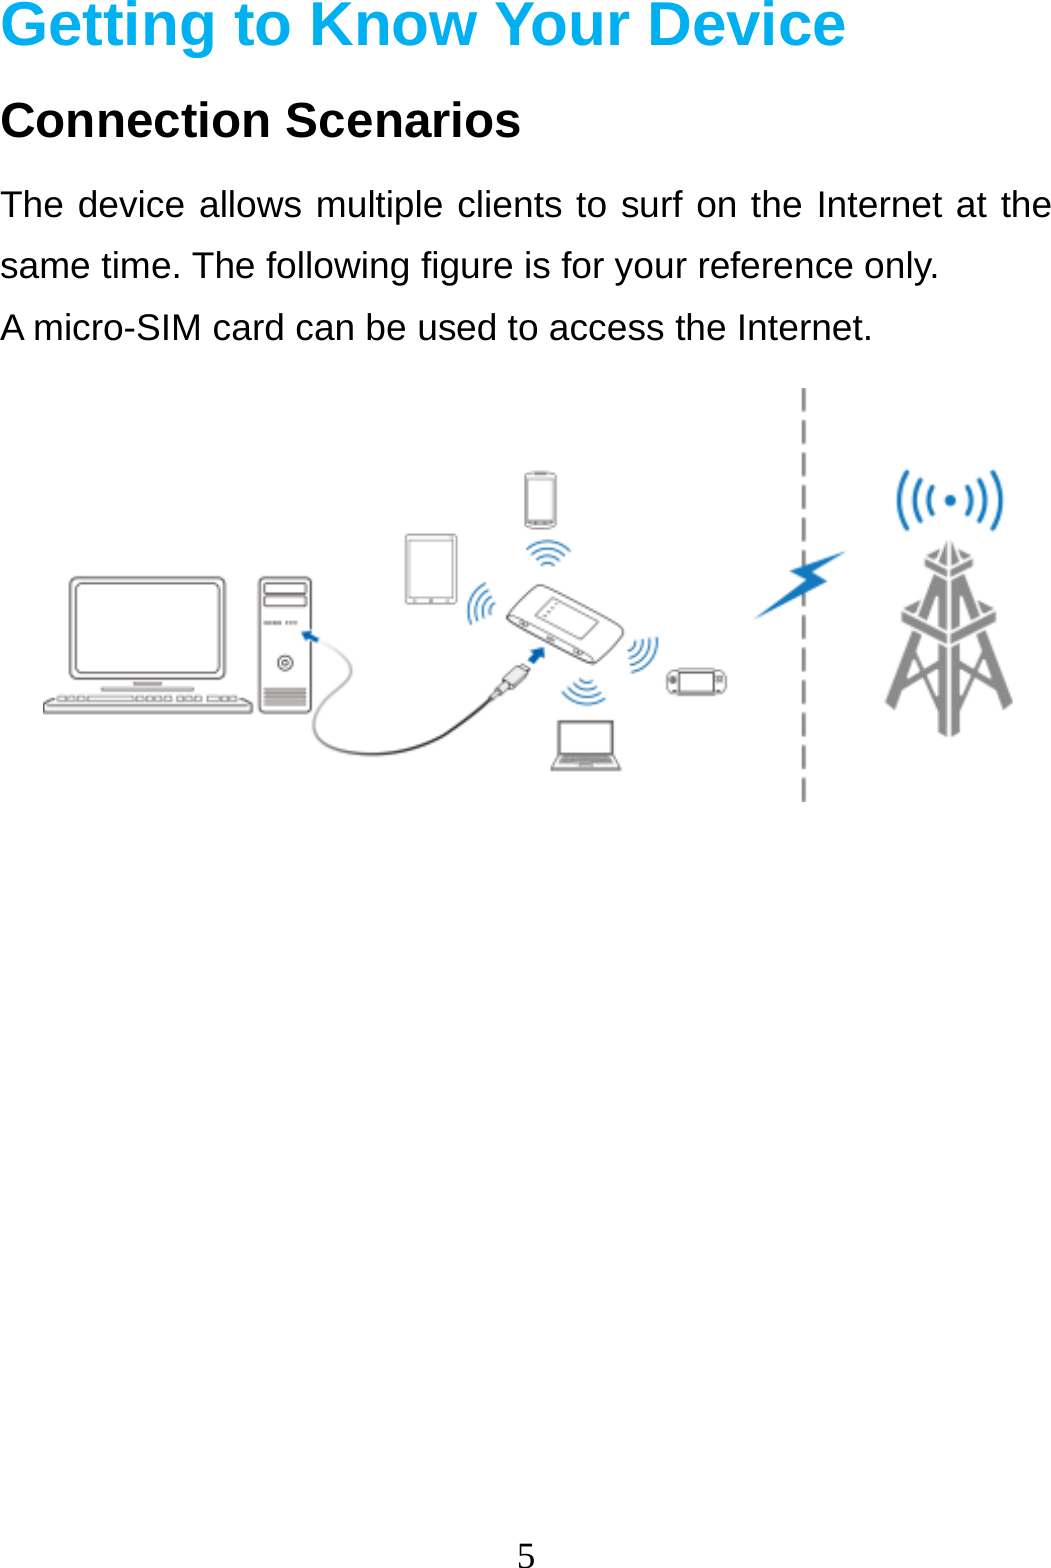 5  Getting to Know Your Device Connection Scenarios The device allows multiple clients to surf on the Internet at the same time. The following figure is for your reference only.   A micro-SIM card can be used to access the Internet.         